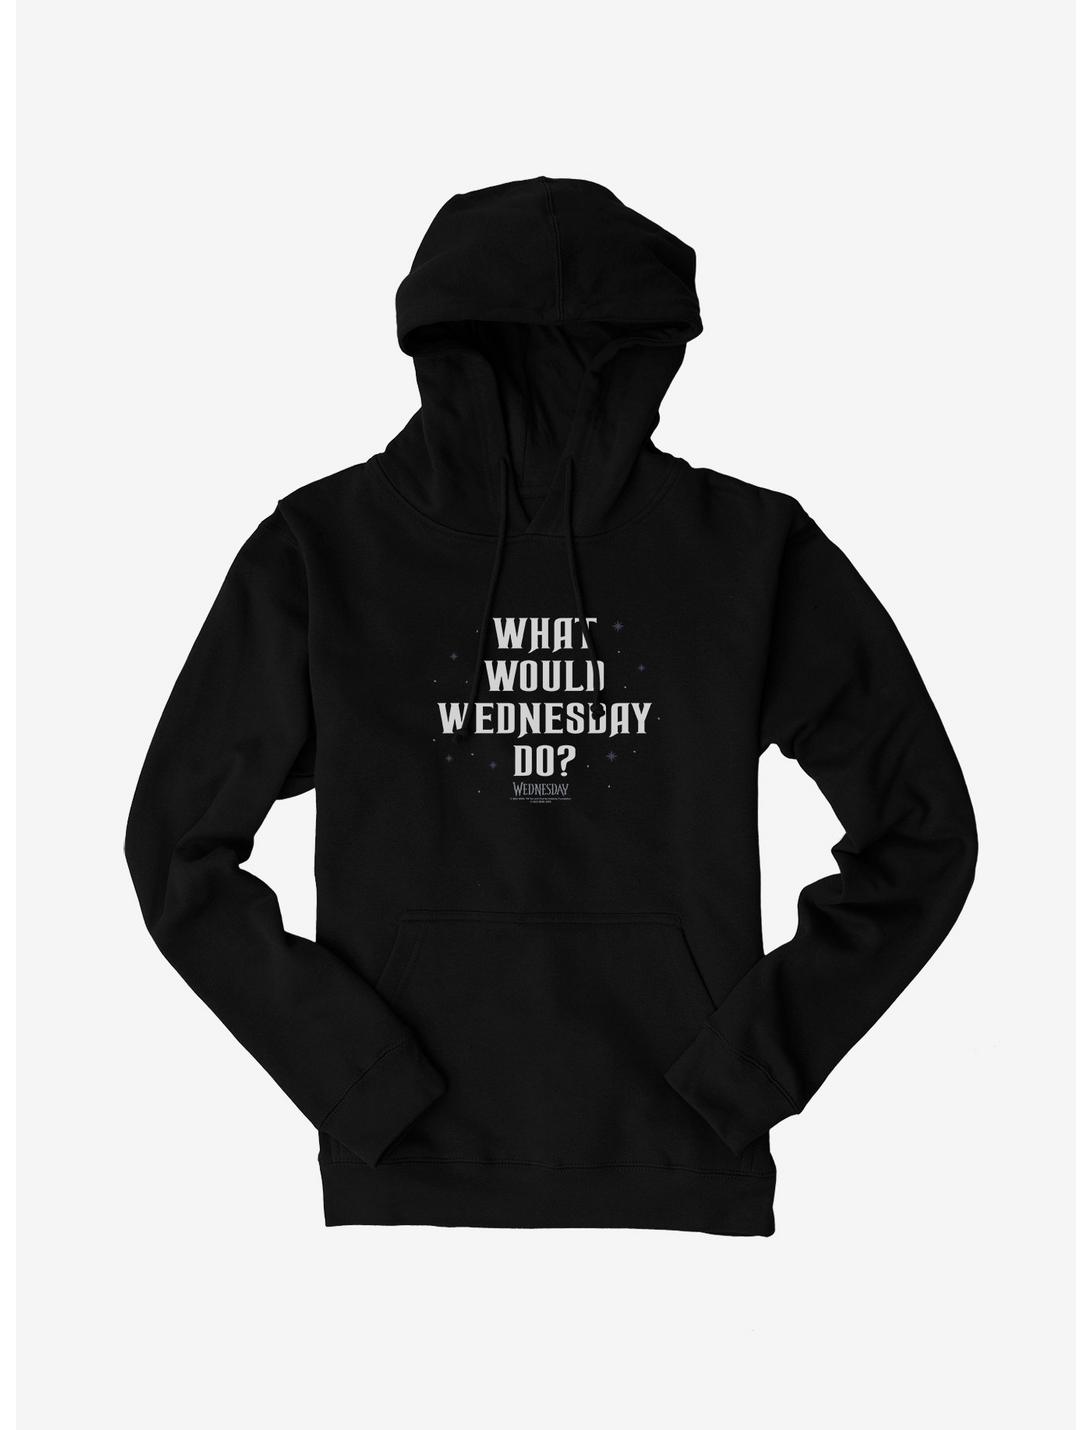 Wednesday What Would Wednesday Do? Hoodie, BLACK, hi-res